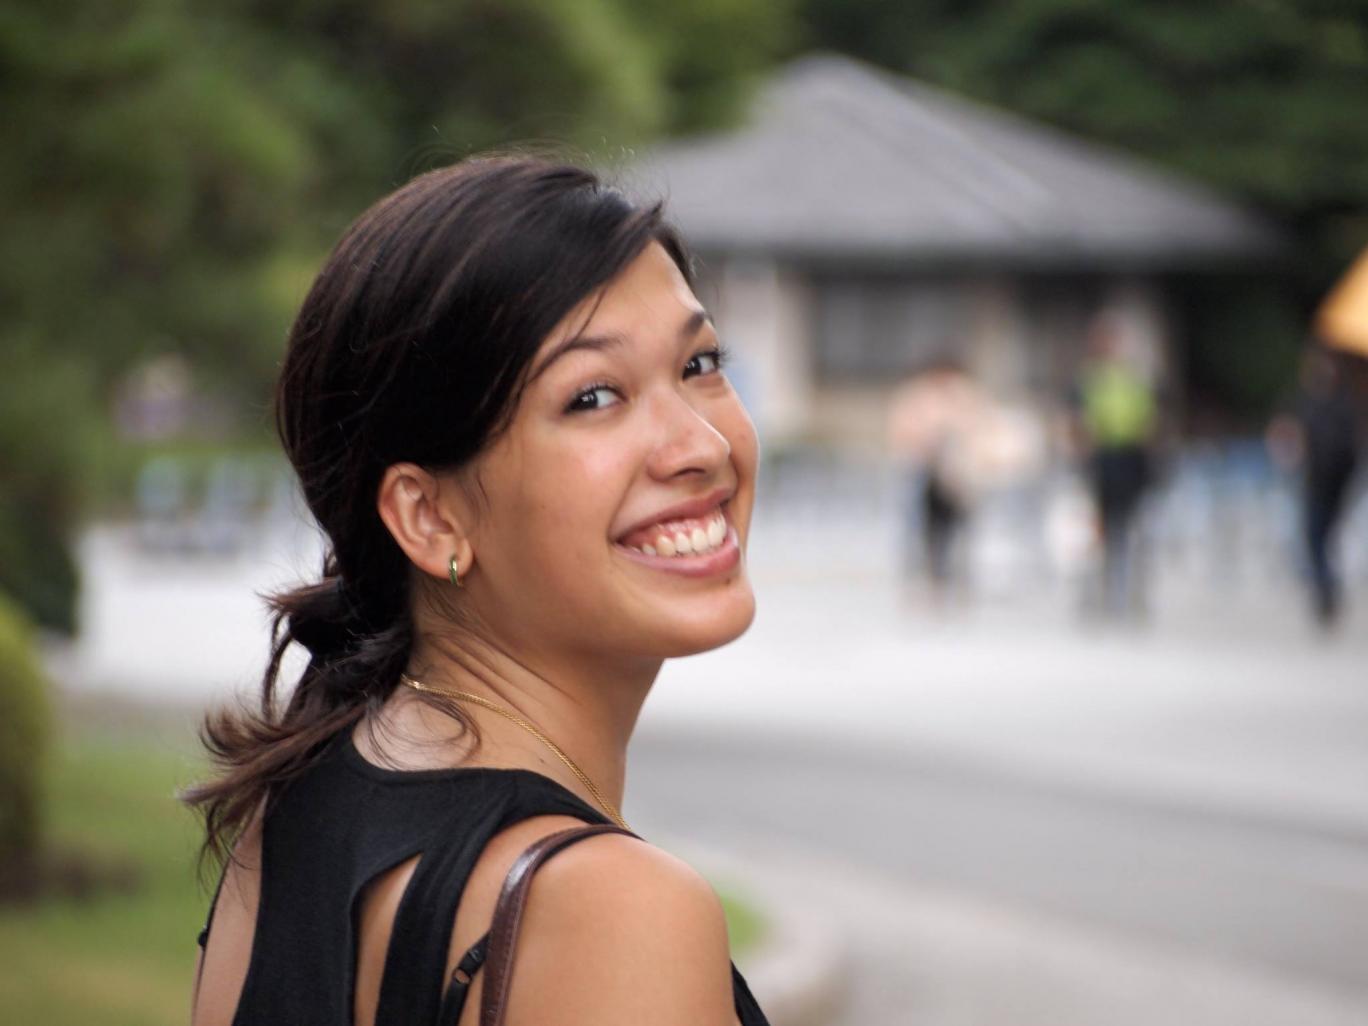 Match4Lara: why ethnic minorities should sign up to be bone-marrow donors